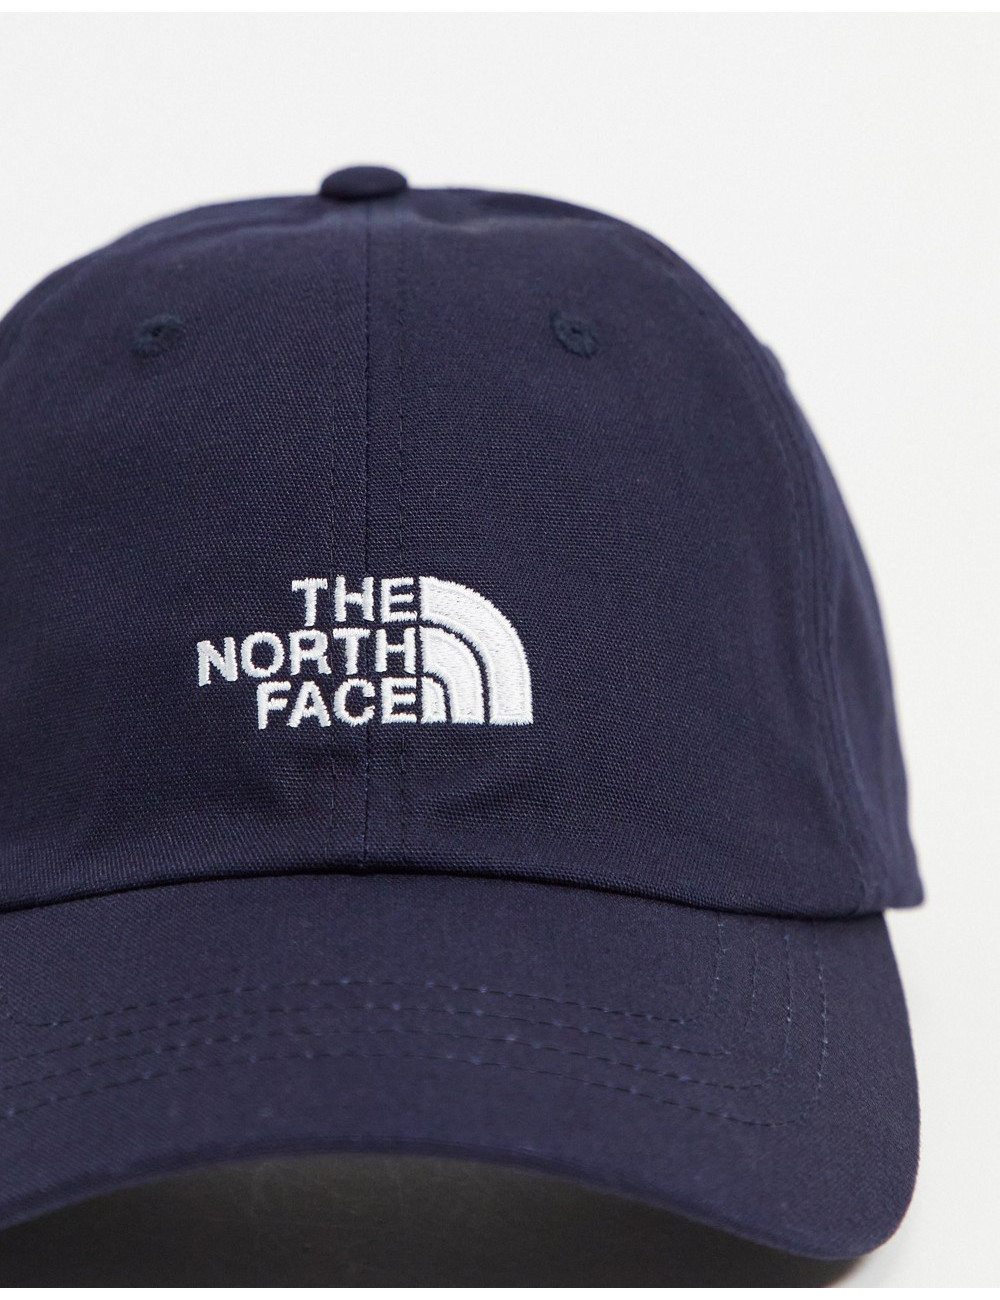 The North Face Norm cap in...